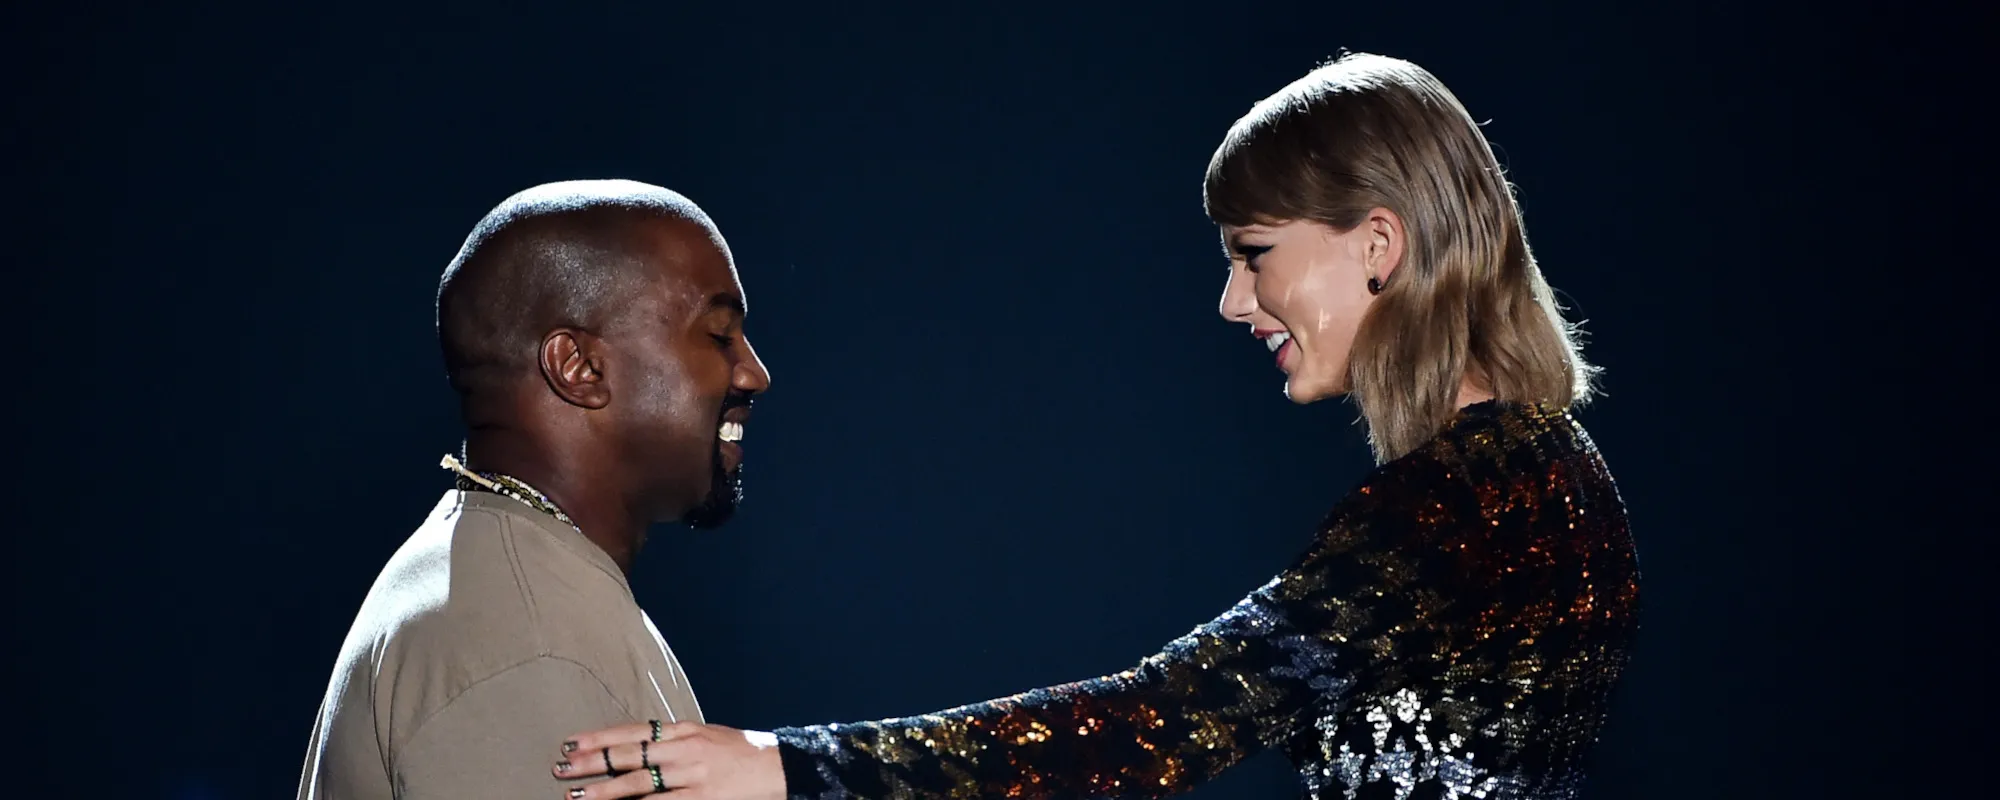 Kanye West Disputes His Publishing Catalog is Being Put Up For Sale—“Just Like Taylor Swift”